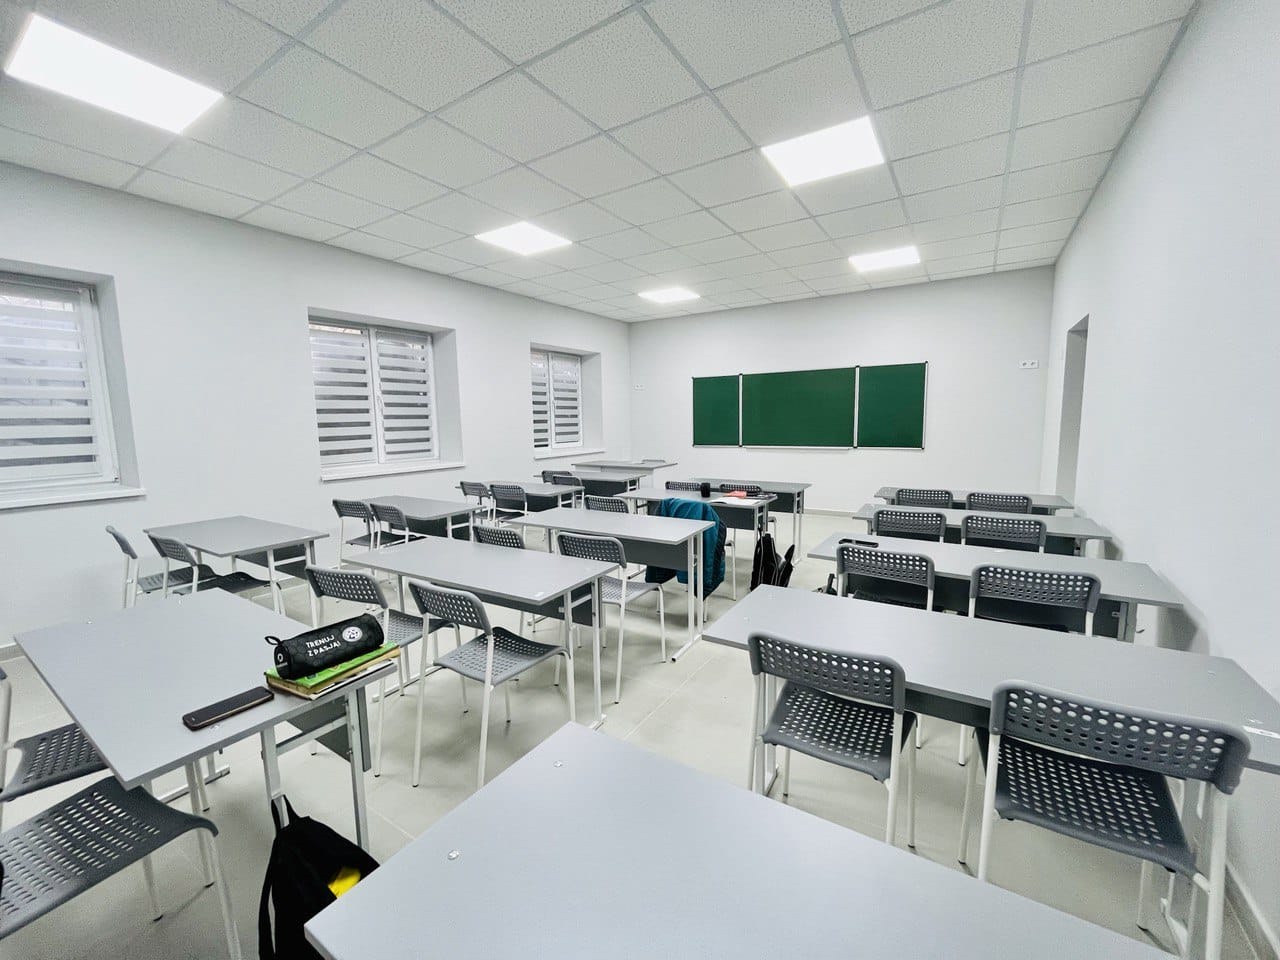 Renovated classrooms